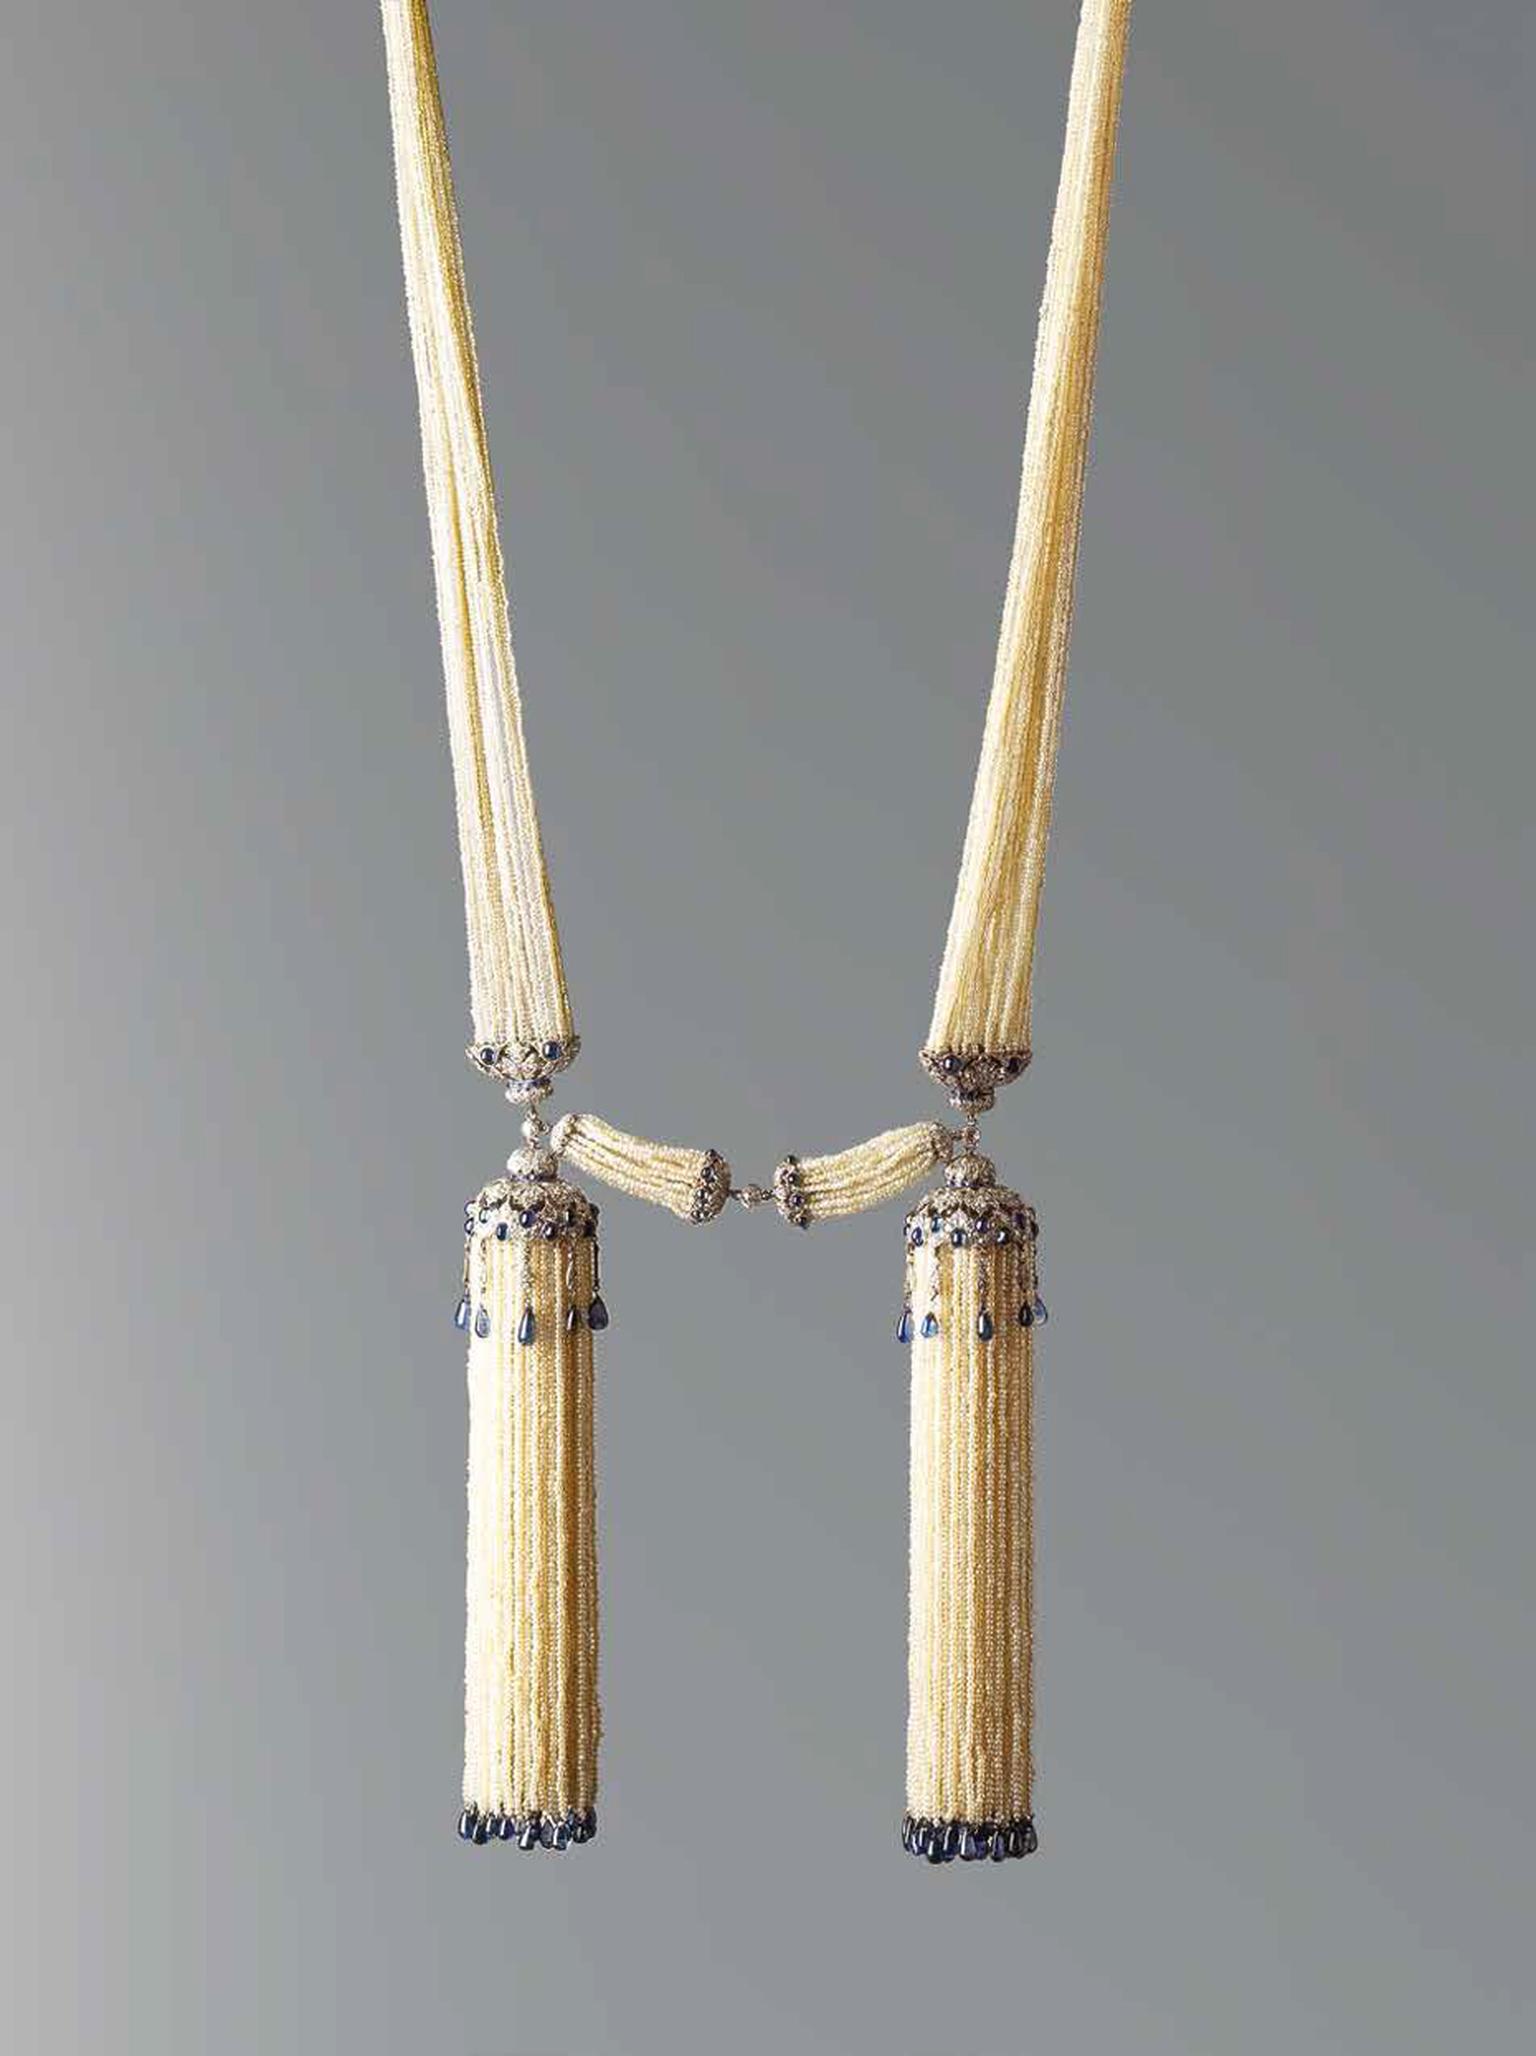 Chaumet Bayade`re platinum necklace from 1920 featuring diamonds, sapphires and seed pearls